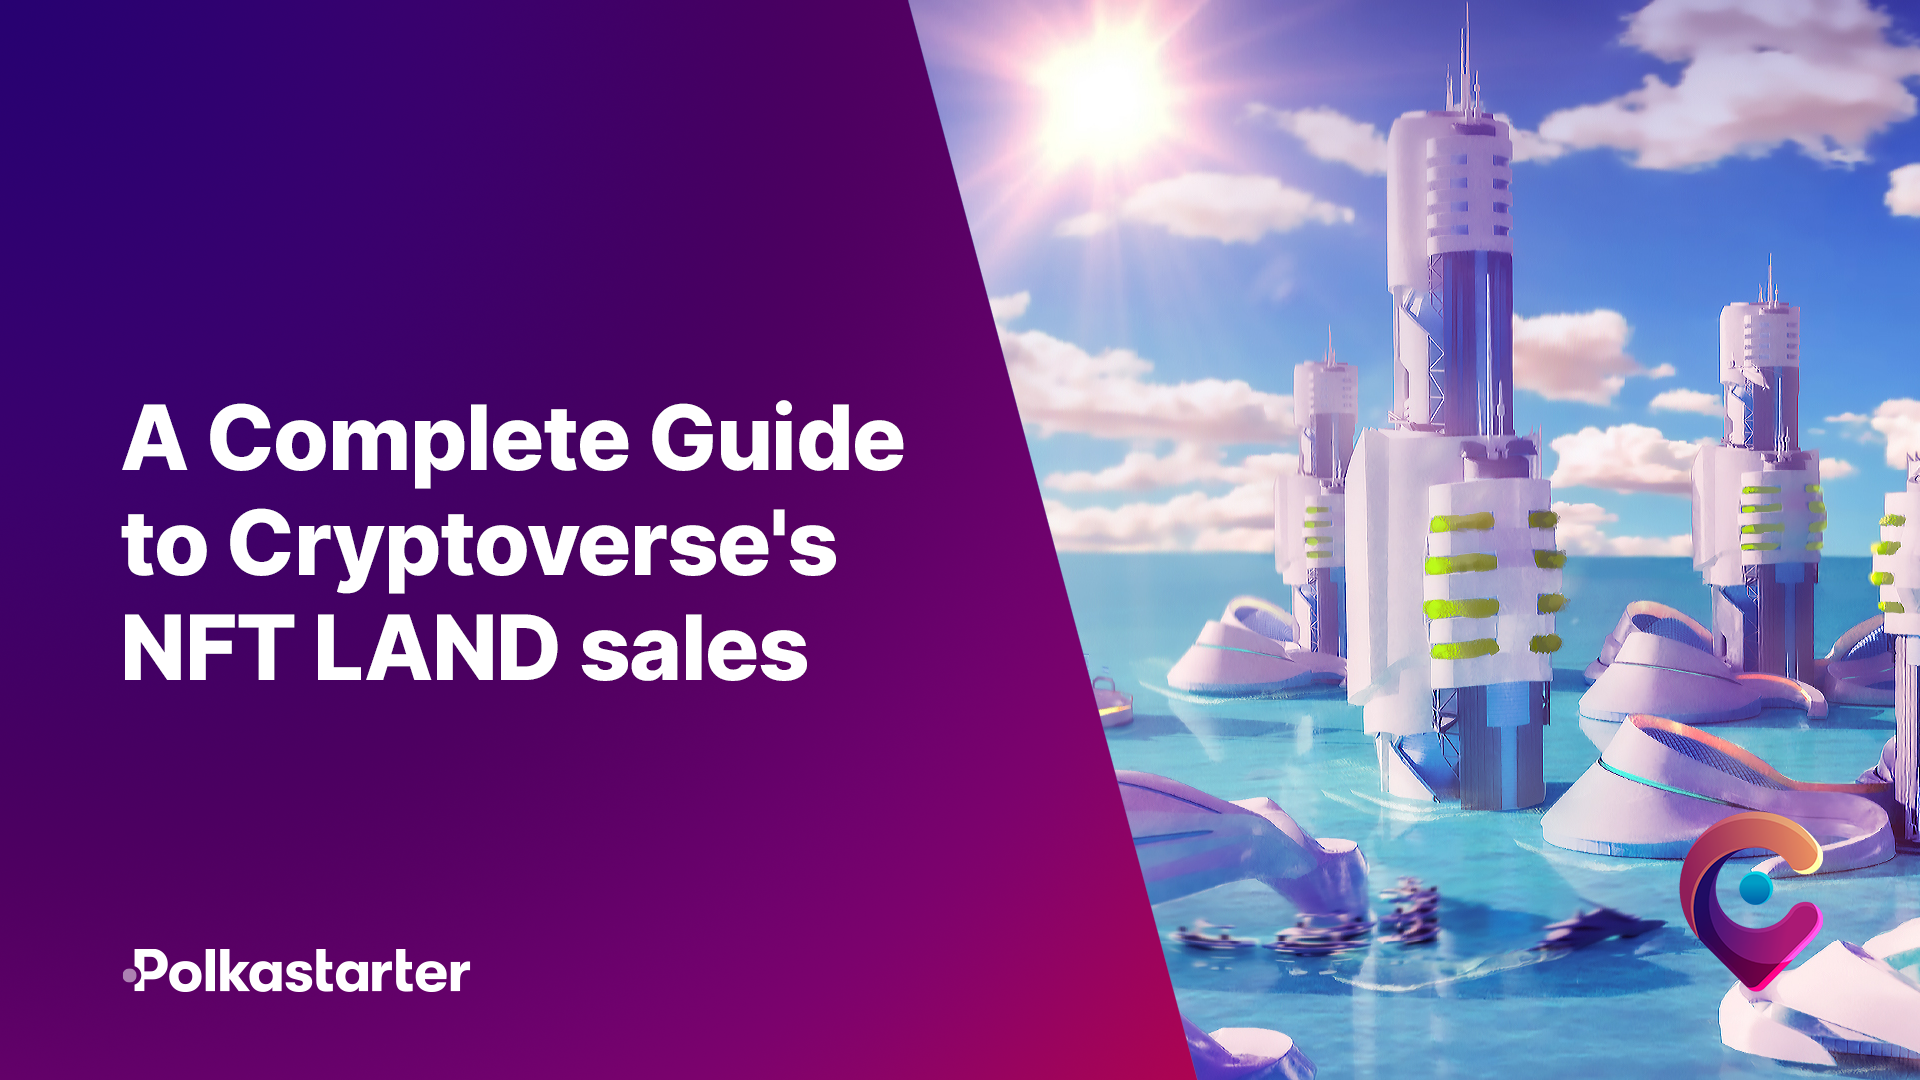 polkastarter-a-complete-guide-to-cryptoverse-s-nft-land-sales